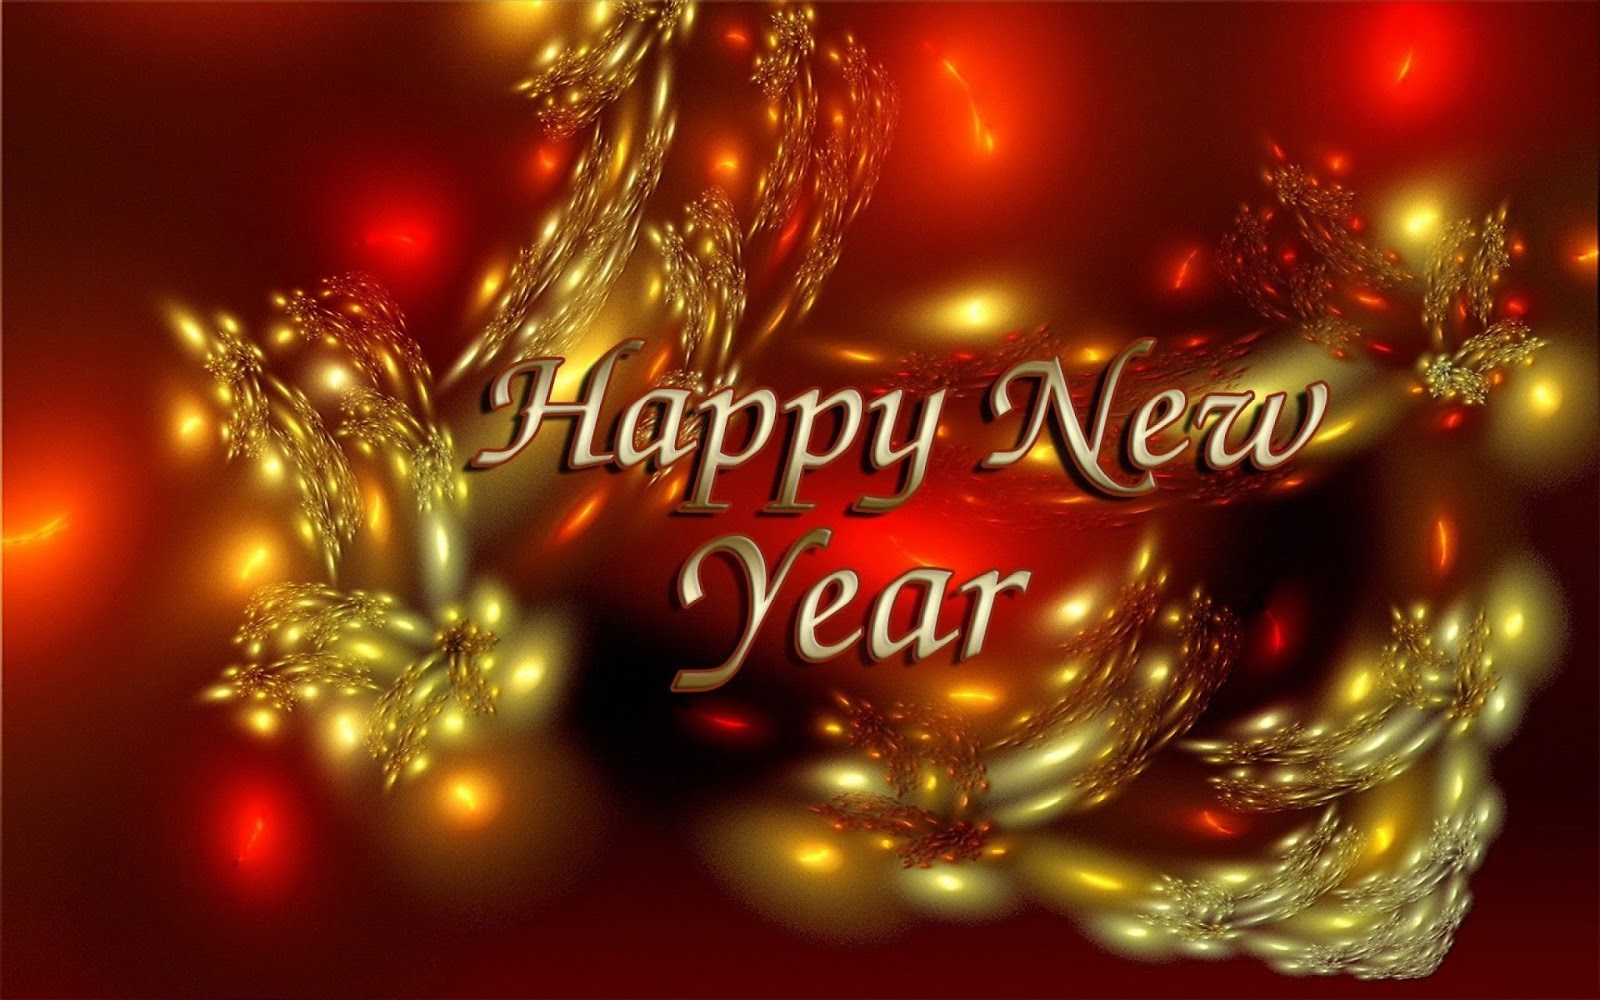 Happy New Year HD Wallpapers with Messages and Quotes